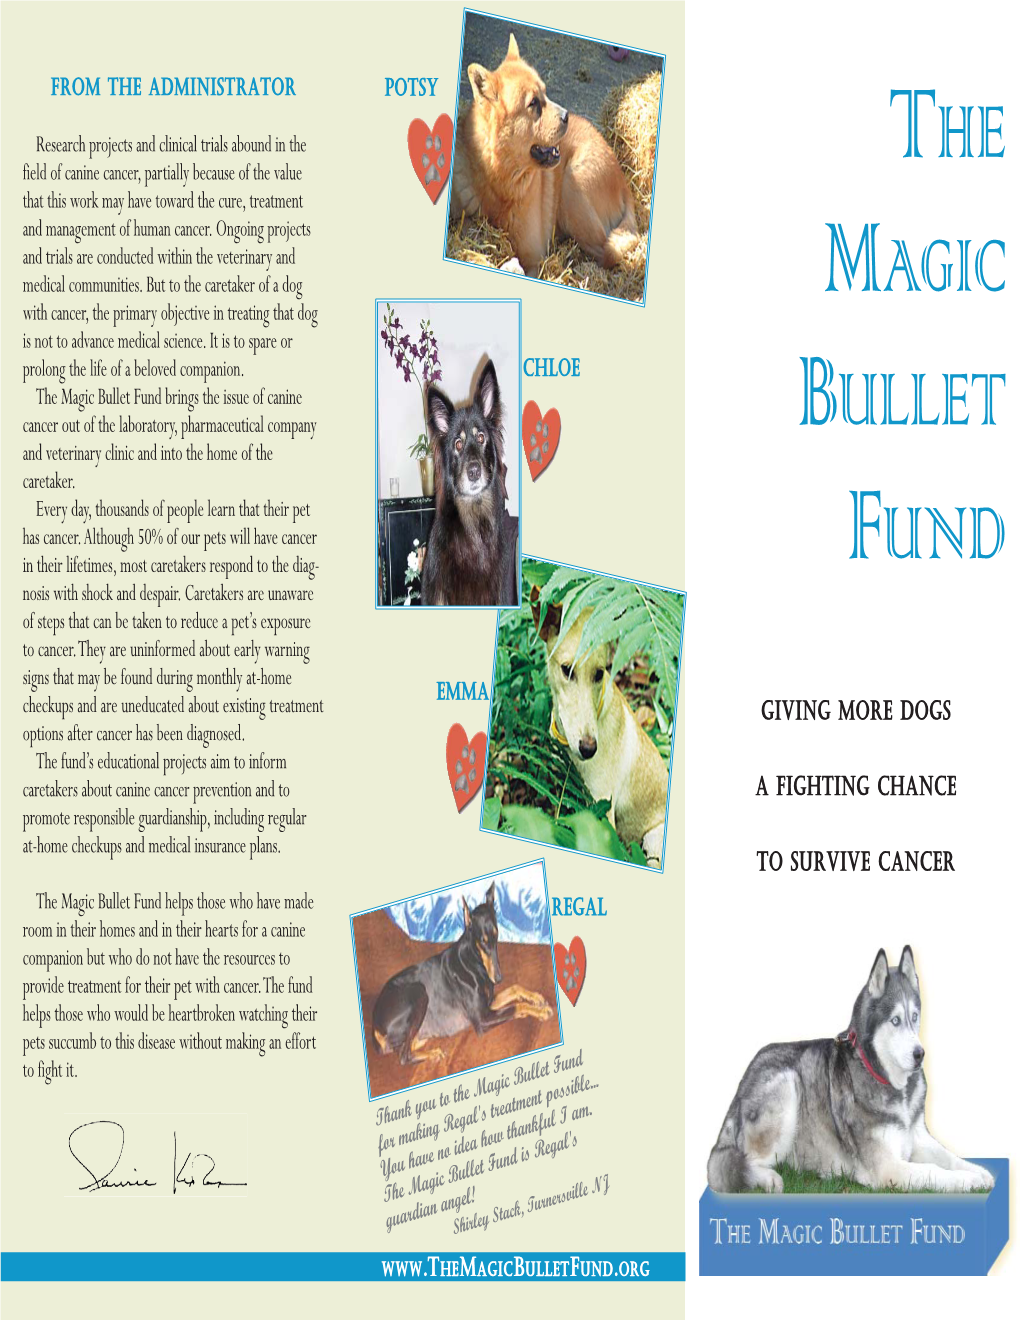 The Magic Bullet Fund Brings the Issue of Canine Cancer out of the Laboratory, Pharmaceutical Company ULLET and Veterinary Clinic and Into the Home of the B Caretaker